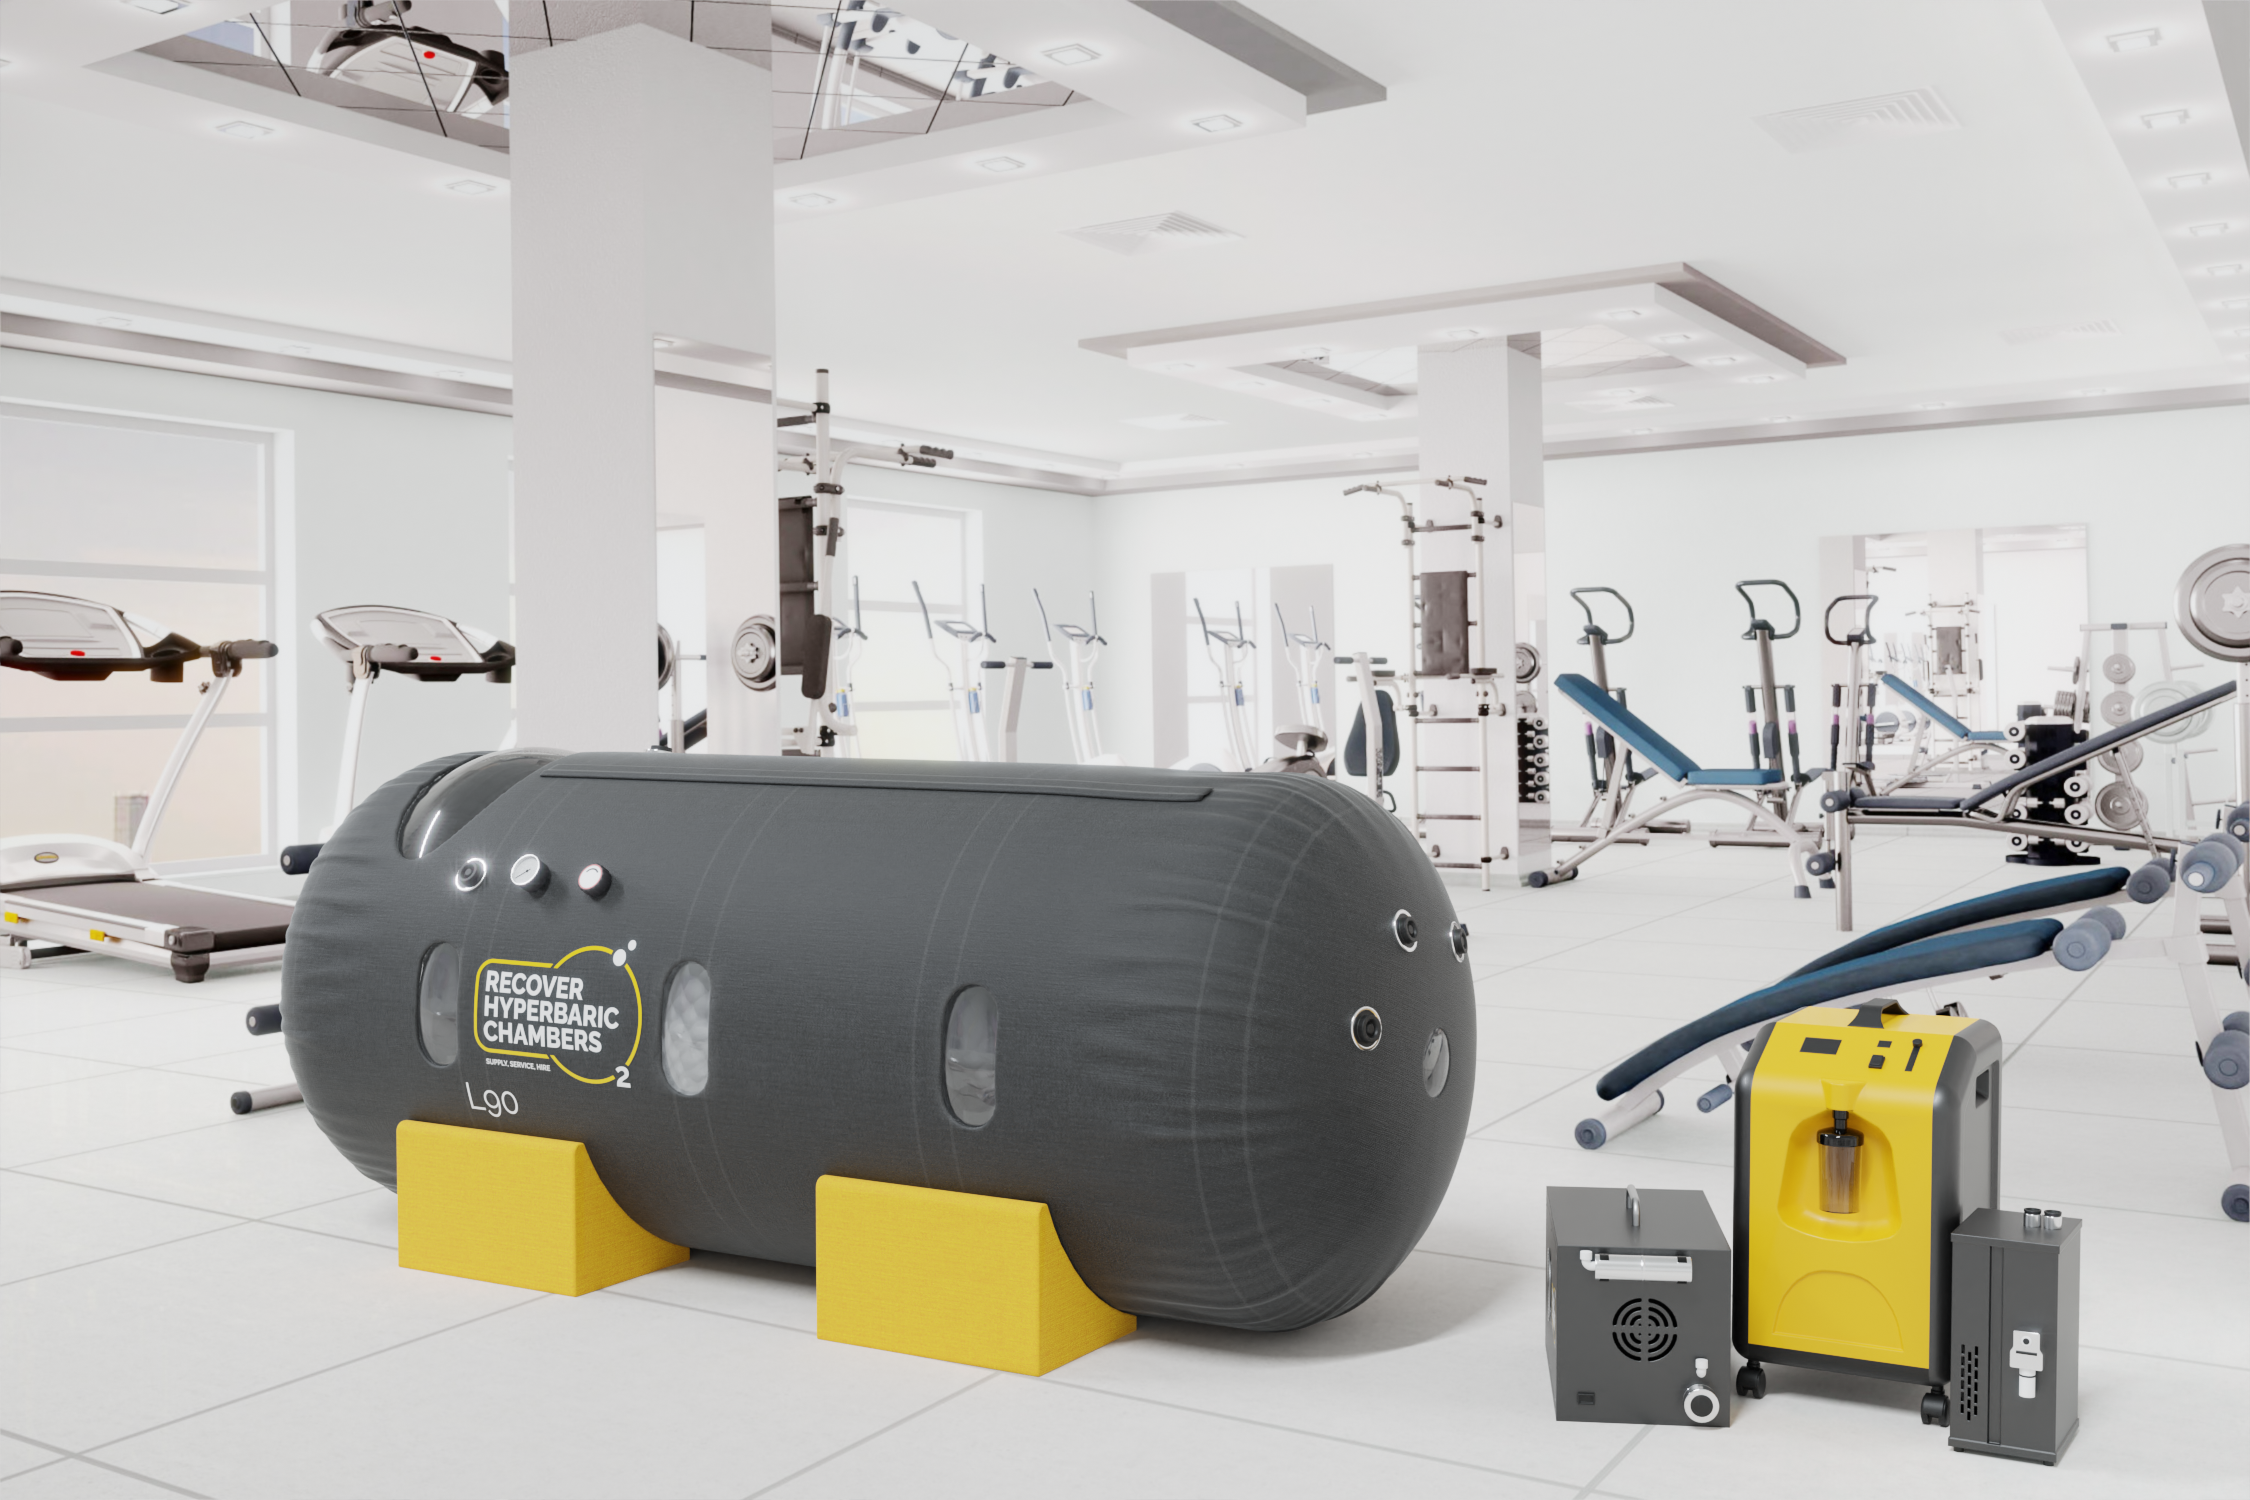 Purchase Hyperbaric Oxygen Chamber UK - Recover L90 - Buy Hyperbaric Chamber | Recover Hyperbaric Chambers